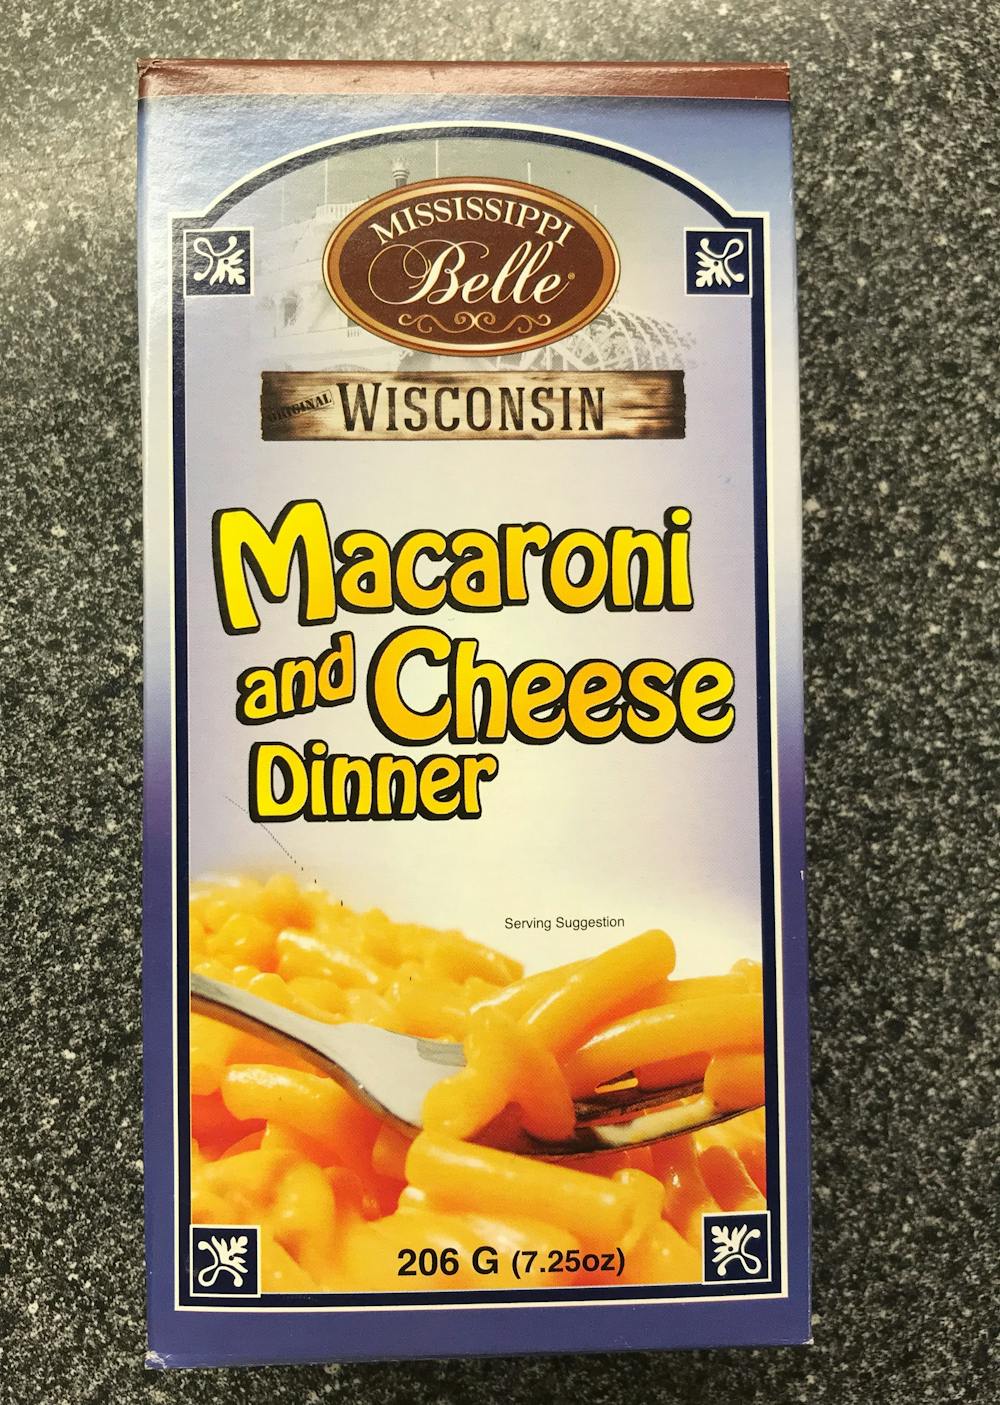 Macaroni and cheese dinner, Mississippi Belle